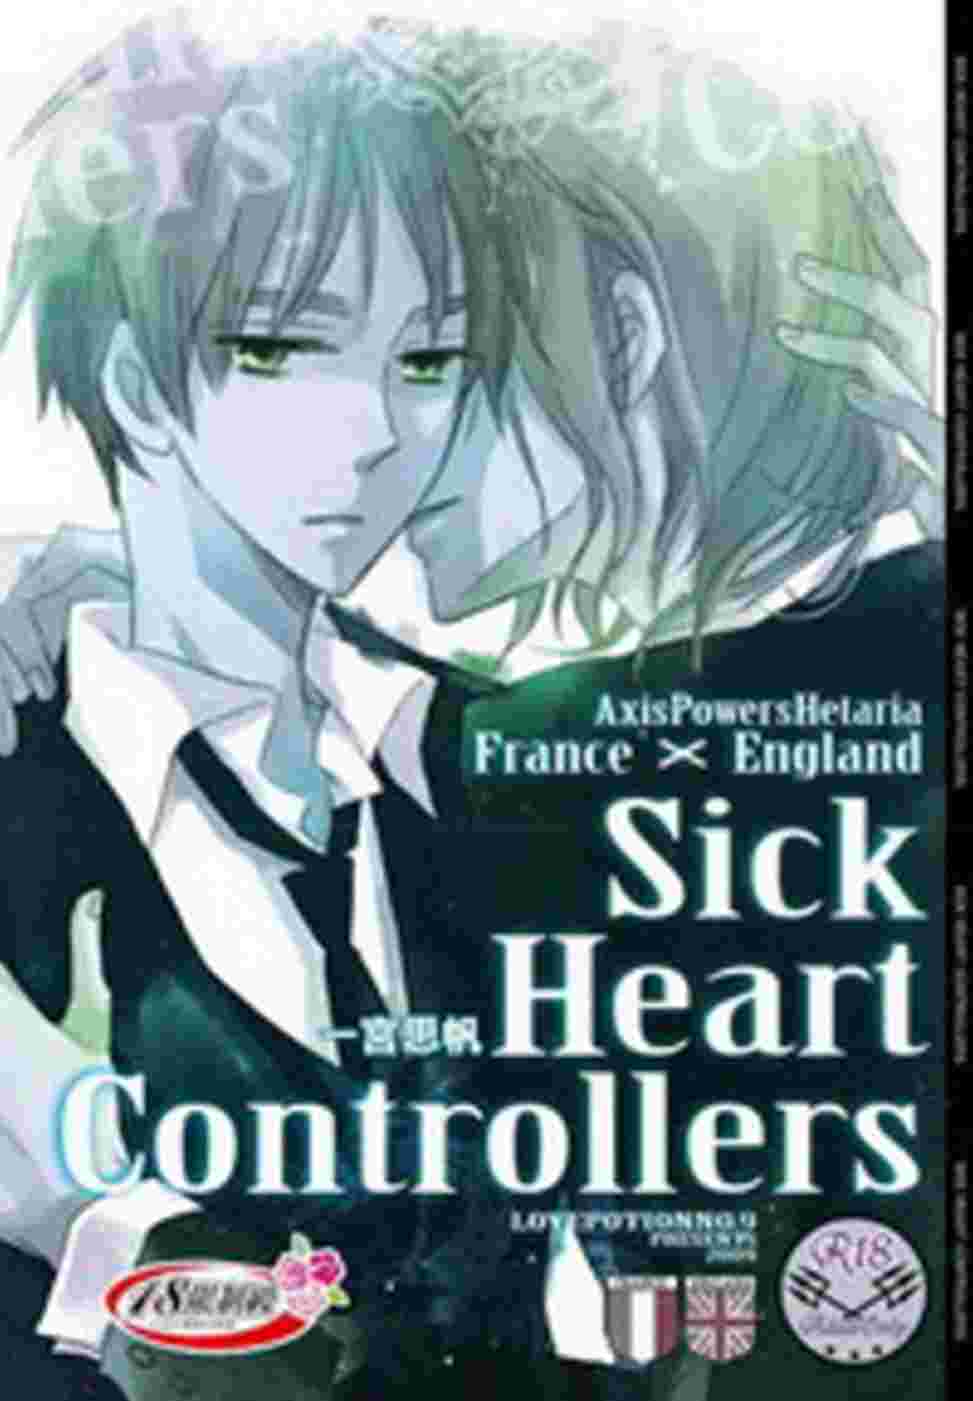 Sick Heart Controllers(限台灣)